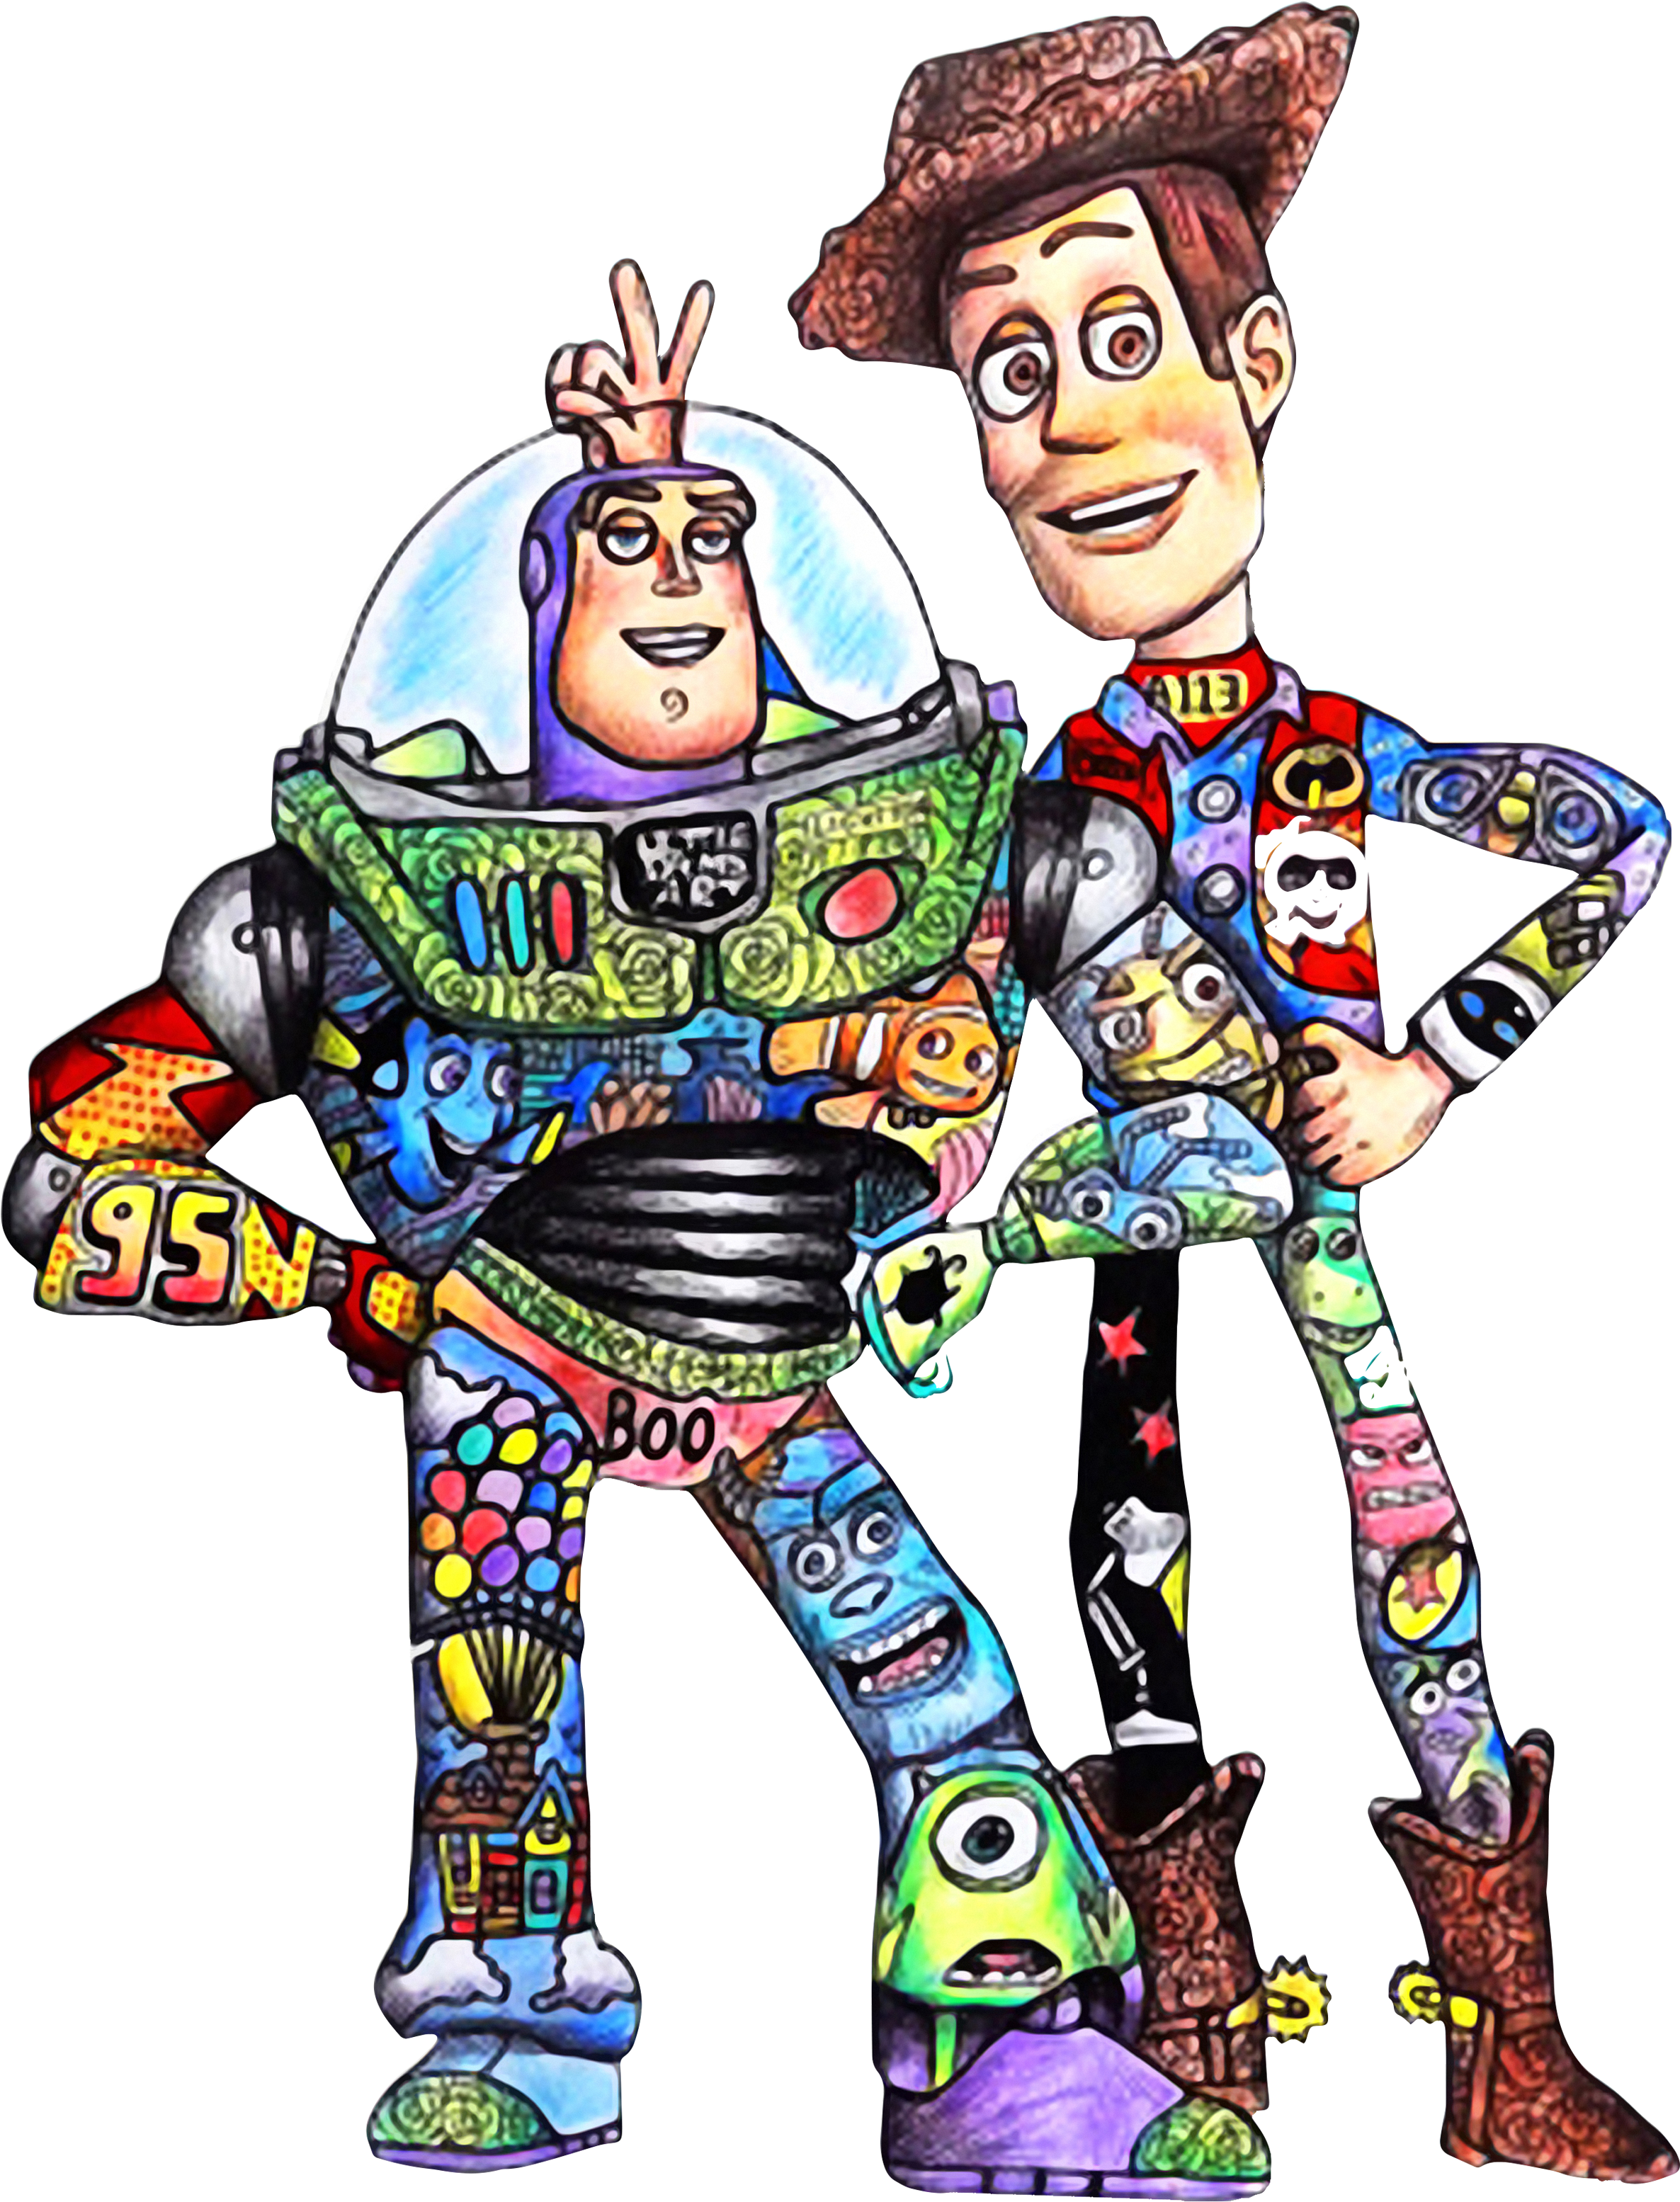 Toy Story Character Buzz Lightyear And Woody Shirt, - Toy Story Character Buzz Lightyear And Woody Shirt, (2400x3200)